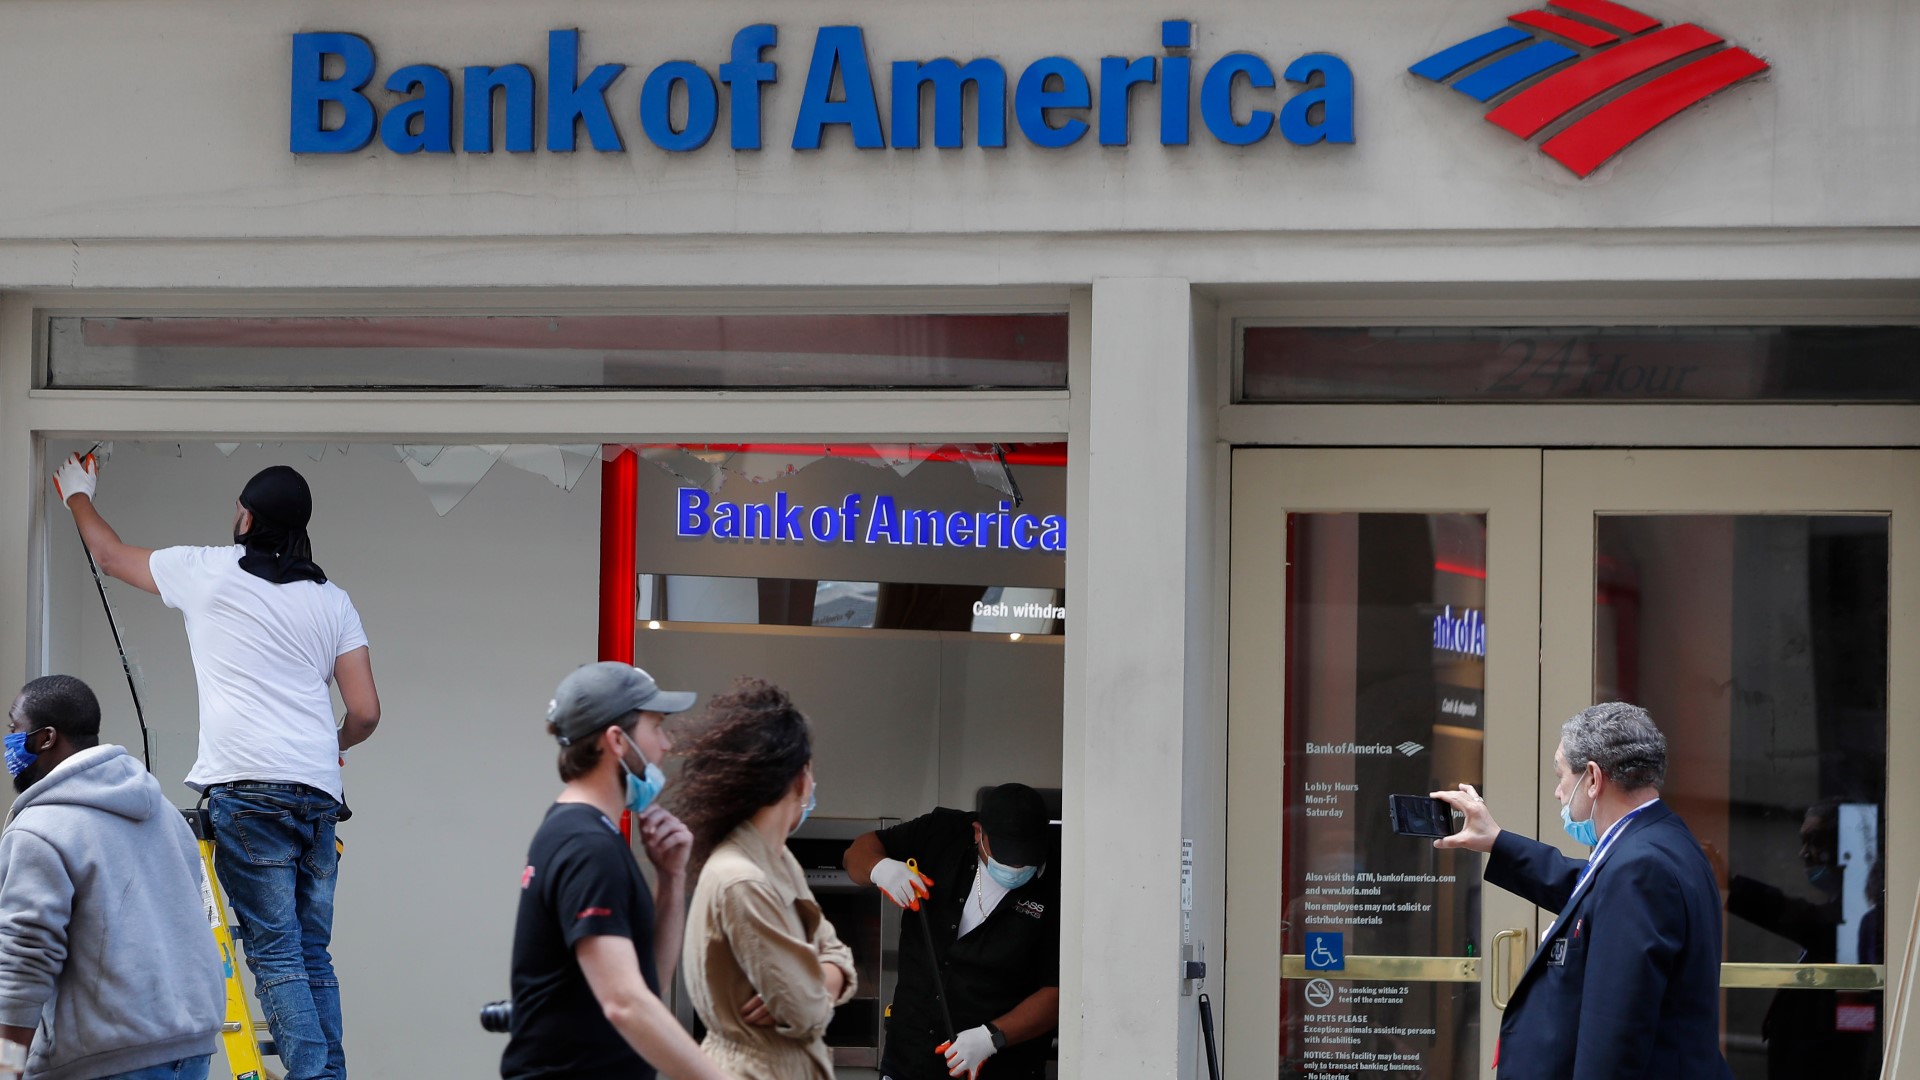 Bank of America online glitch shows inaccurate account balances cbs19.tv